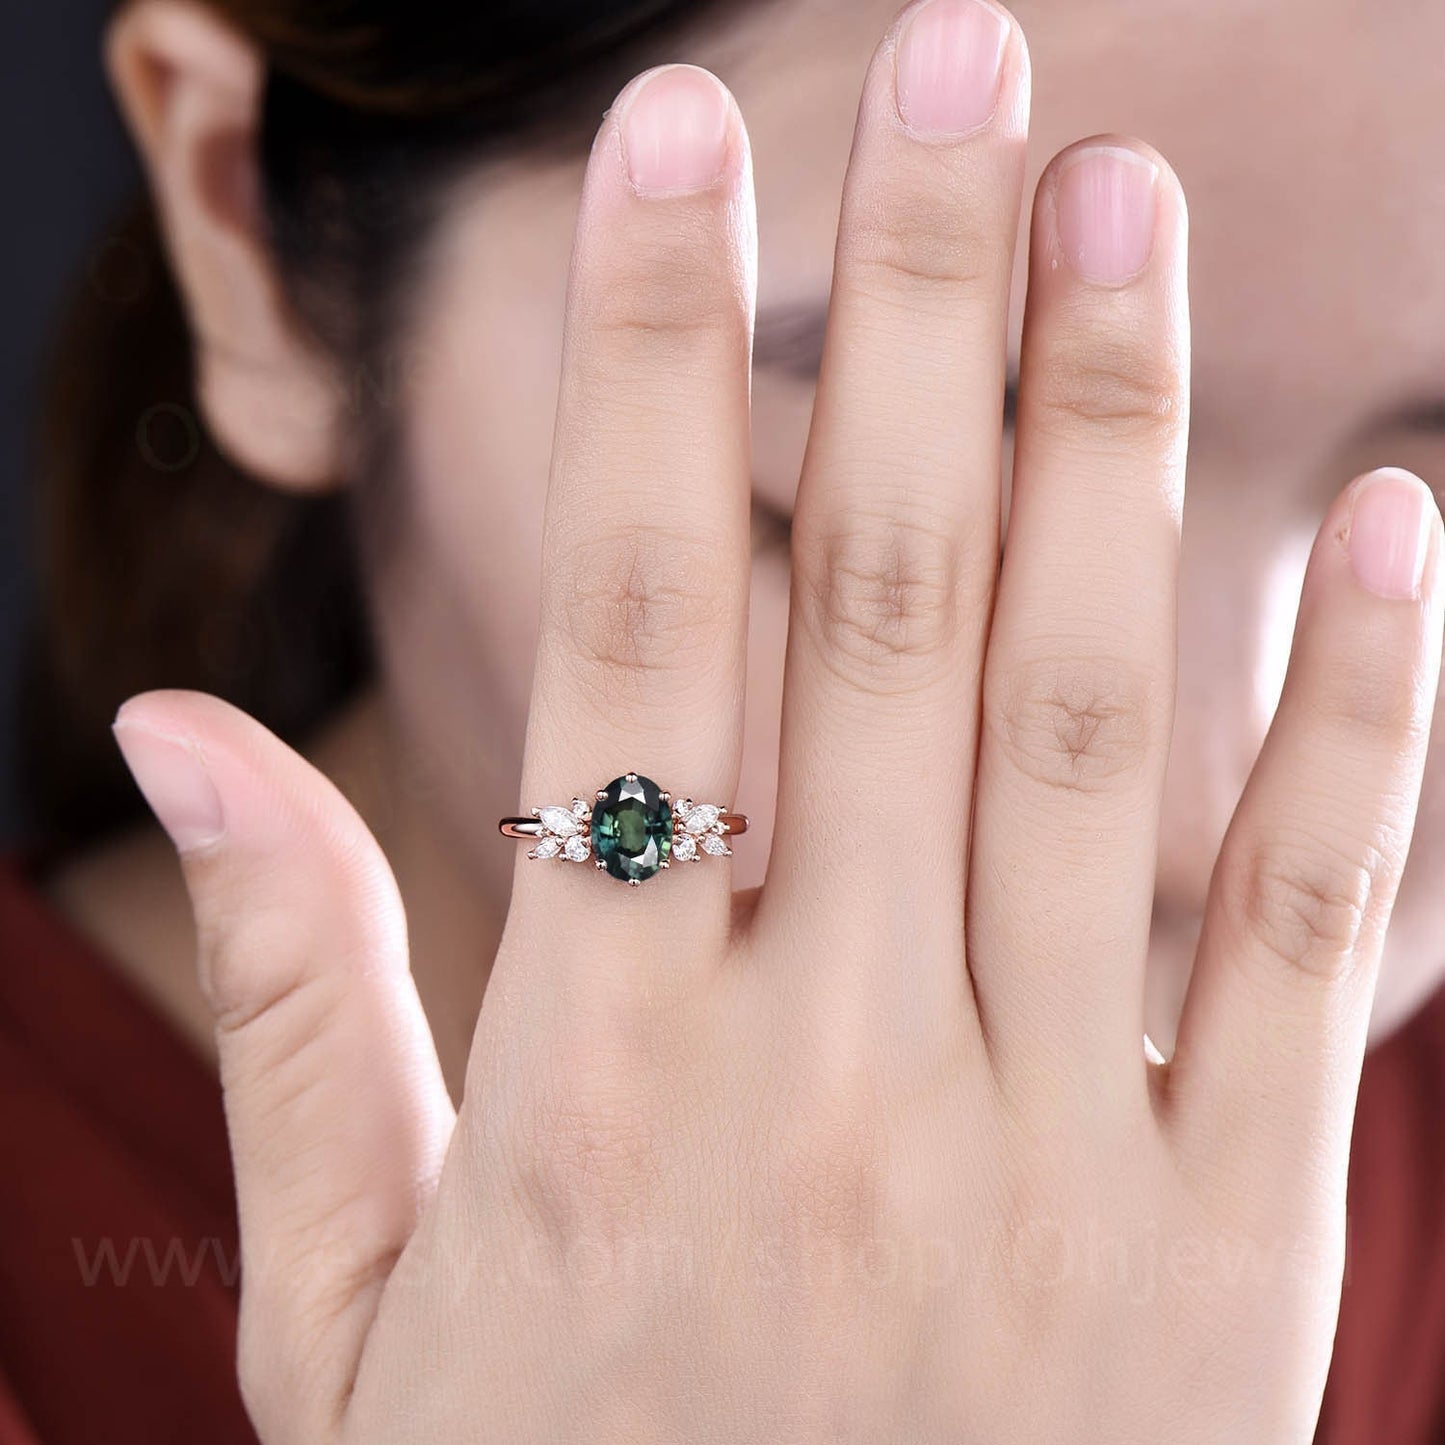 Oval cut green teal sapphire ring gold vintage teal sapphire engagement ring unique cluster engagement ring marquise cut diamond ring women